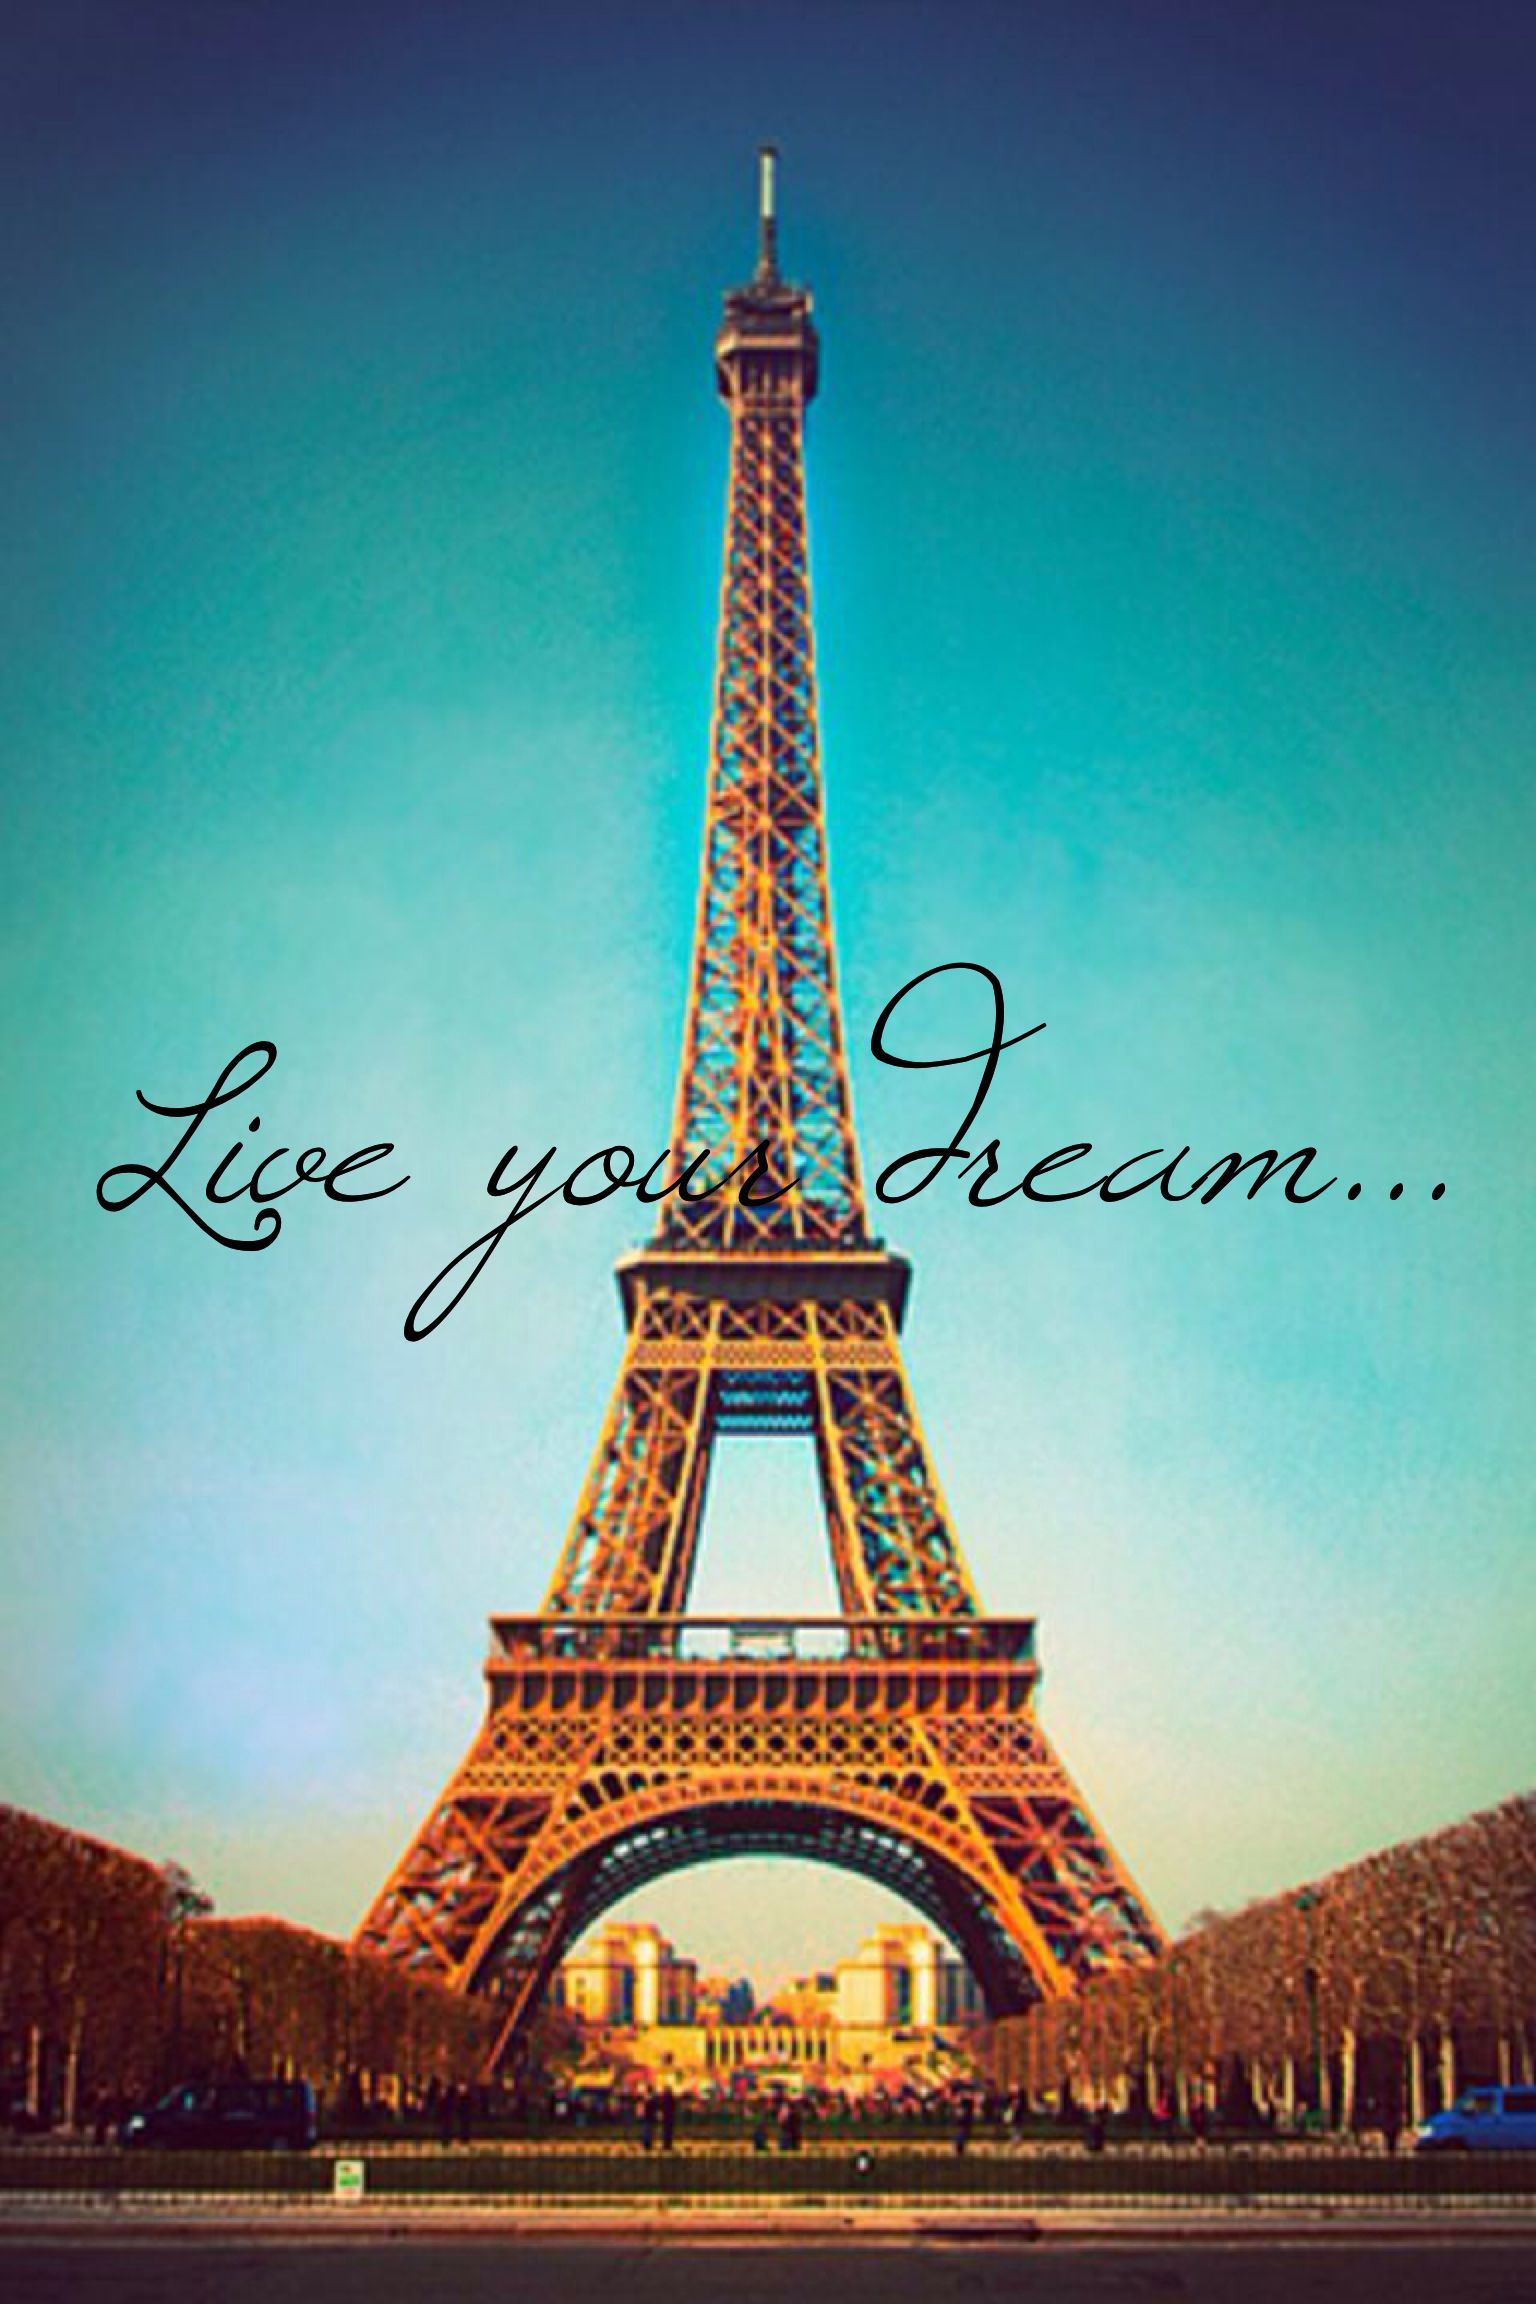 Cute Eiffel Tower Pic Live Your Dream Travel France